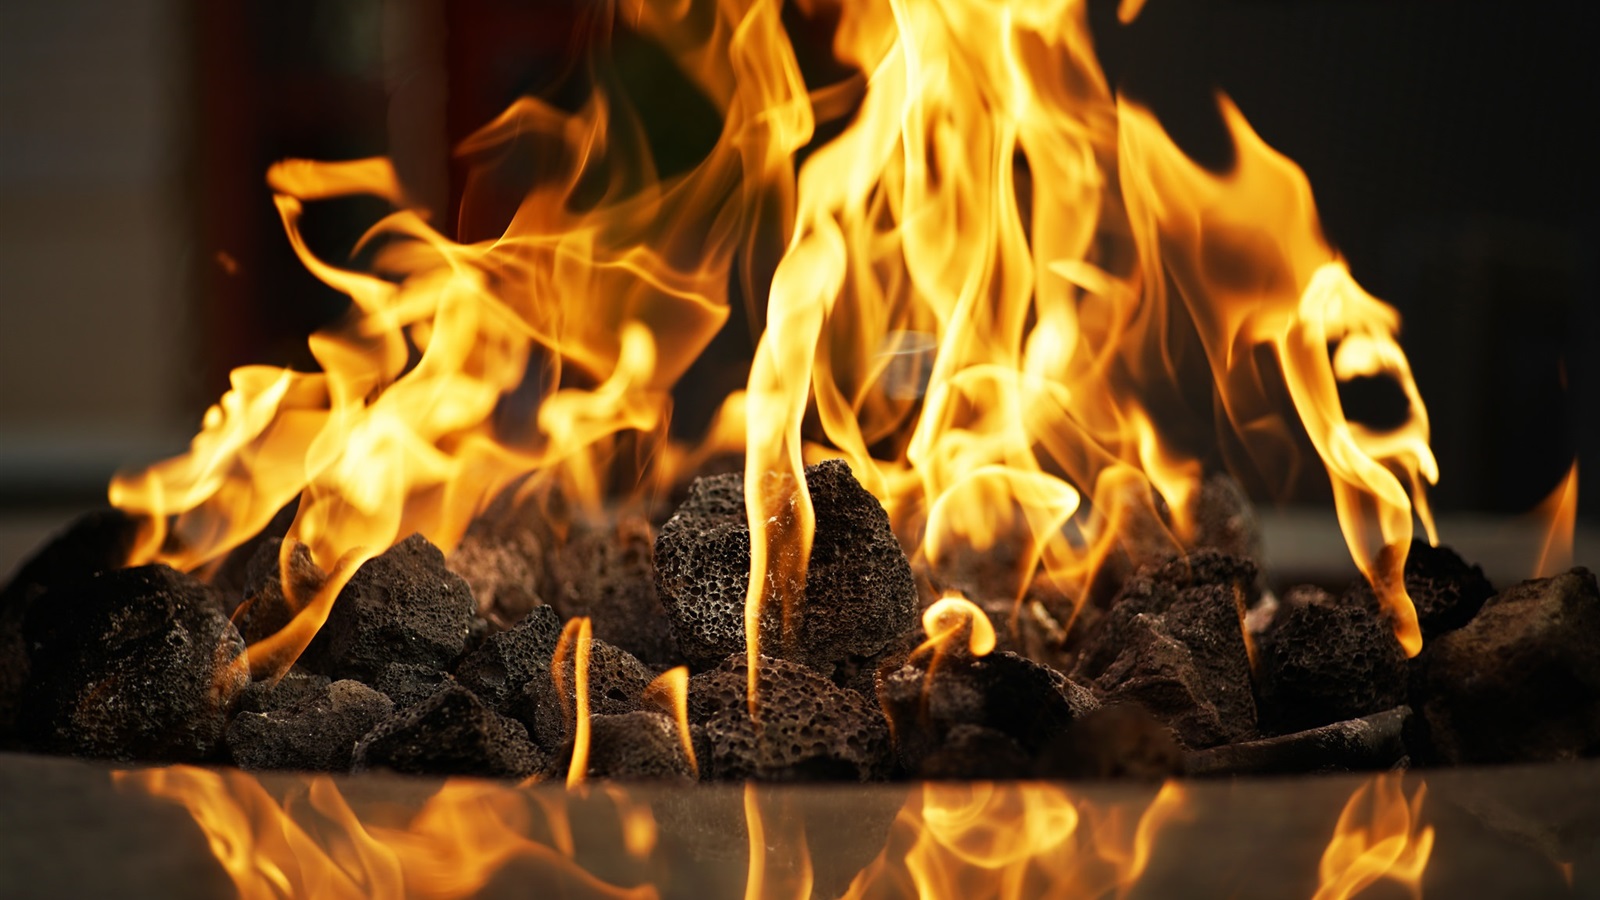 Wallpaper Fire Flame Bustion HD Picture Image